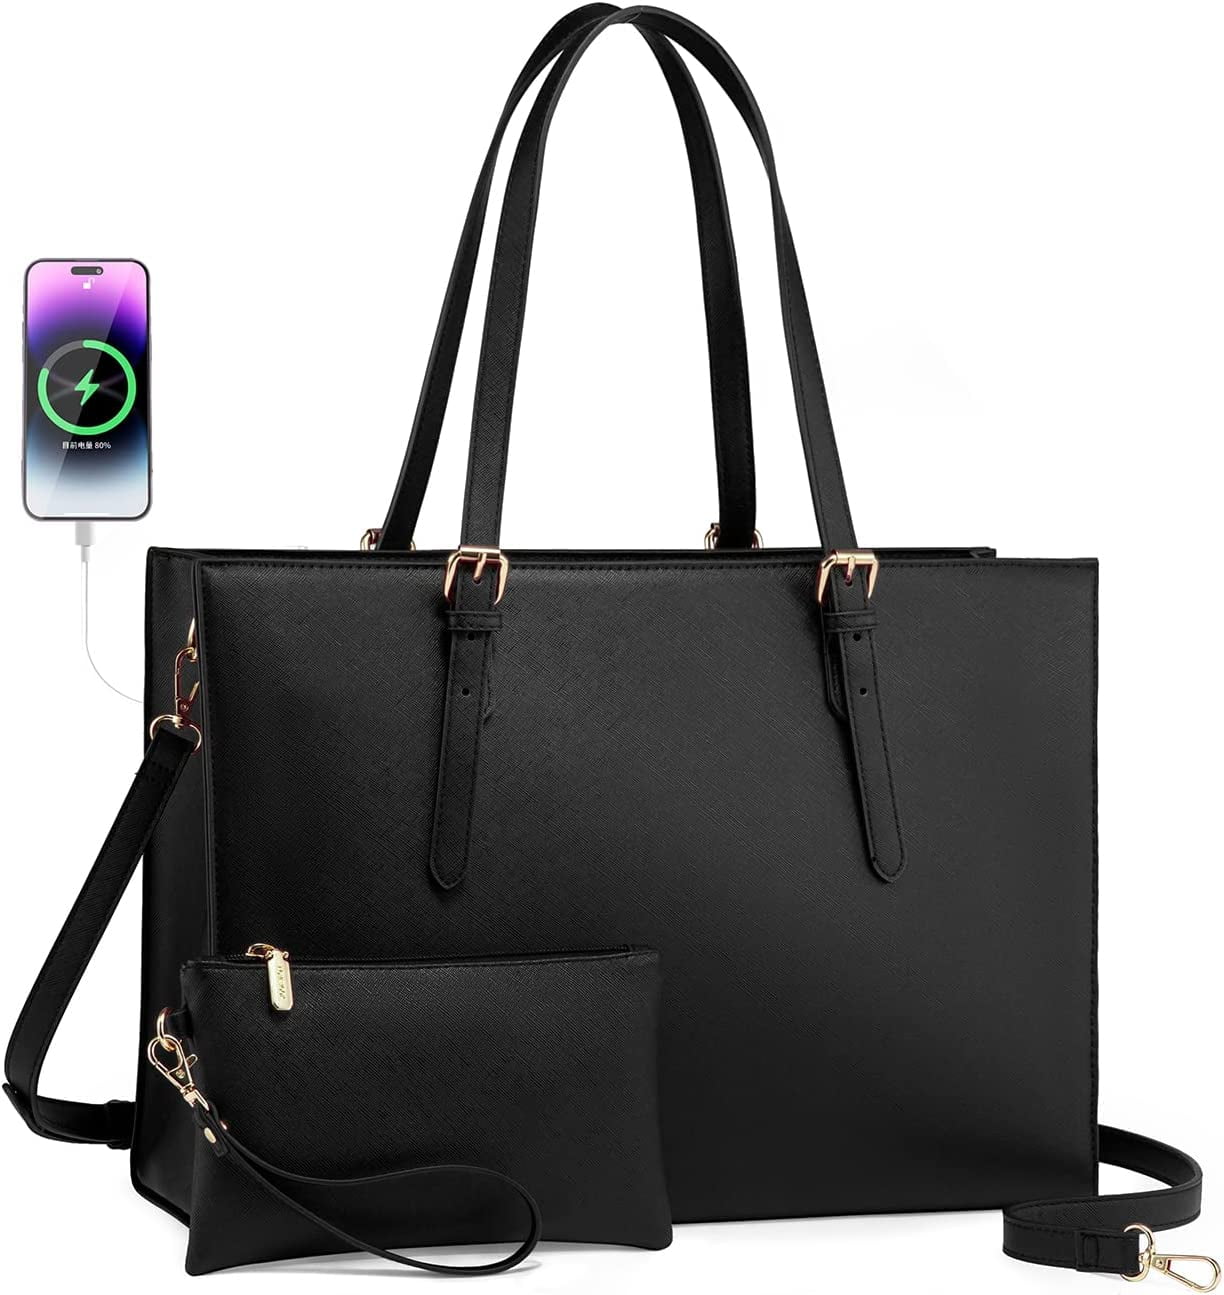 Lovevook Purses and Handbags Work Tote Bag for Women Large Laptop Purse Fit for 15 6 Laptop Black 2597c5be c889 40b0 a70a c8b0fb4b39bd.52773ef5947eeae764e31665a7528921